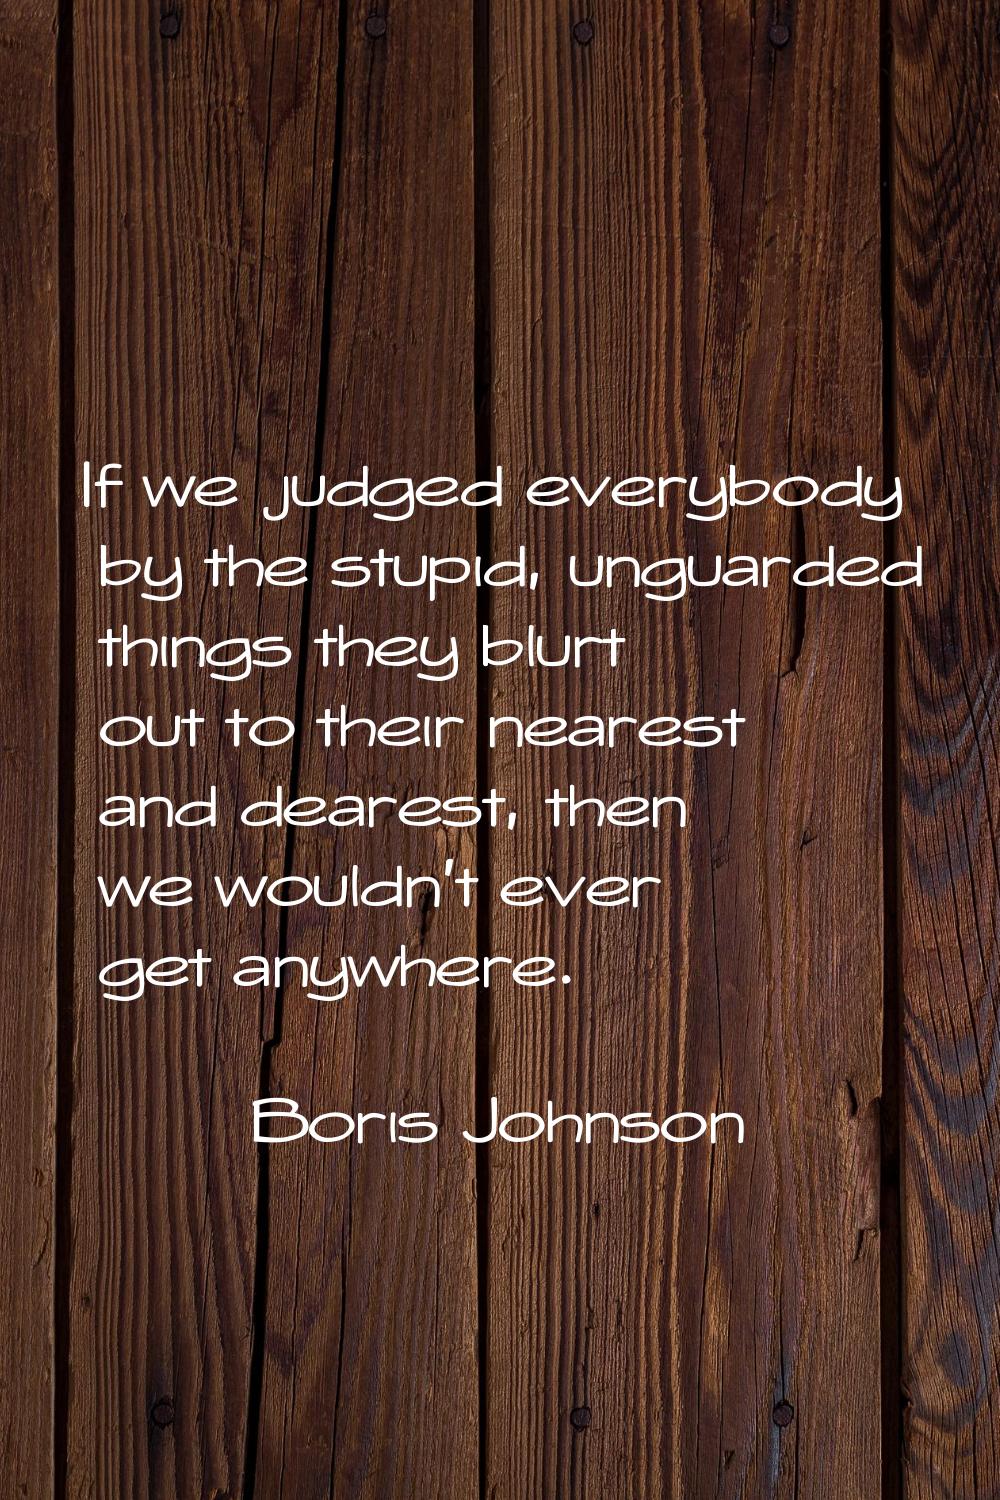 If we judged everybody by the stupid, unguarded things they blurt out to their nearest and dearest,